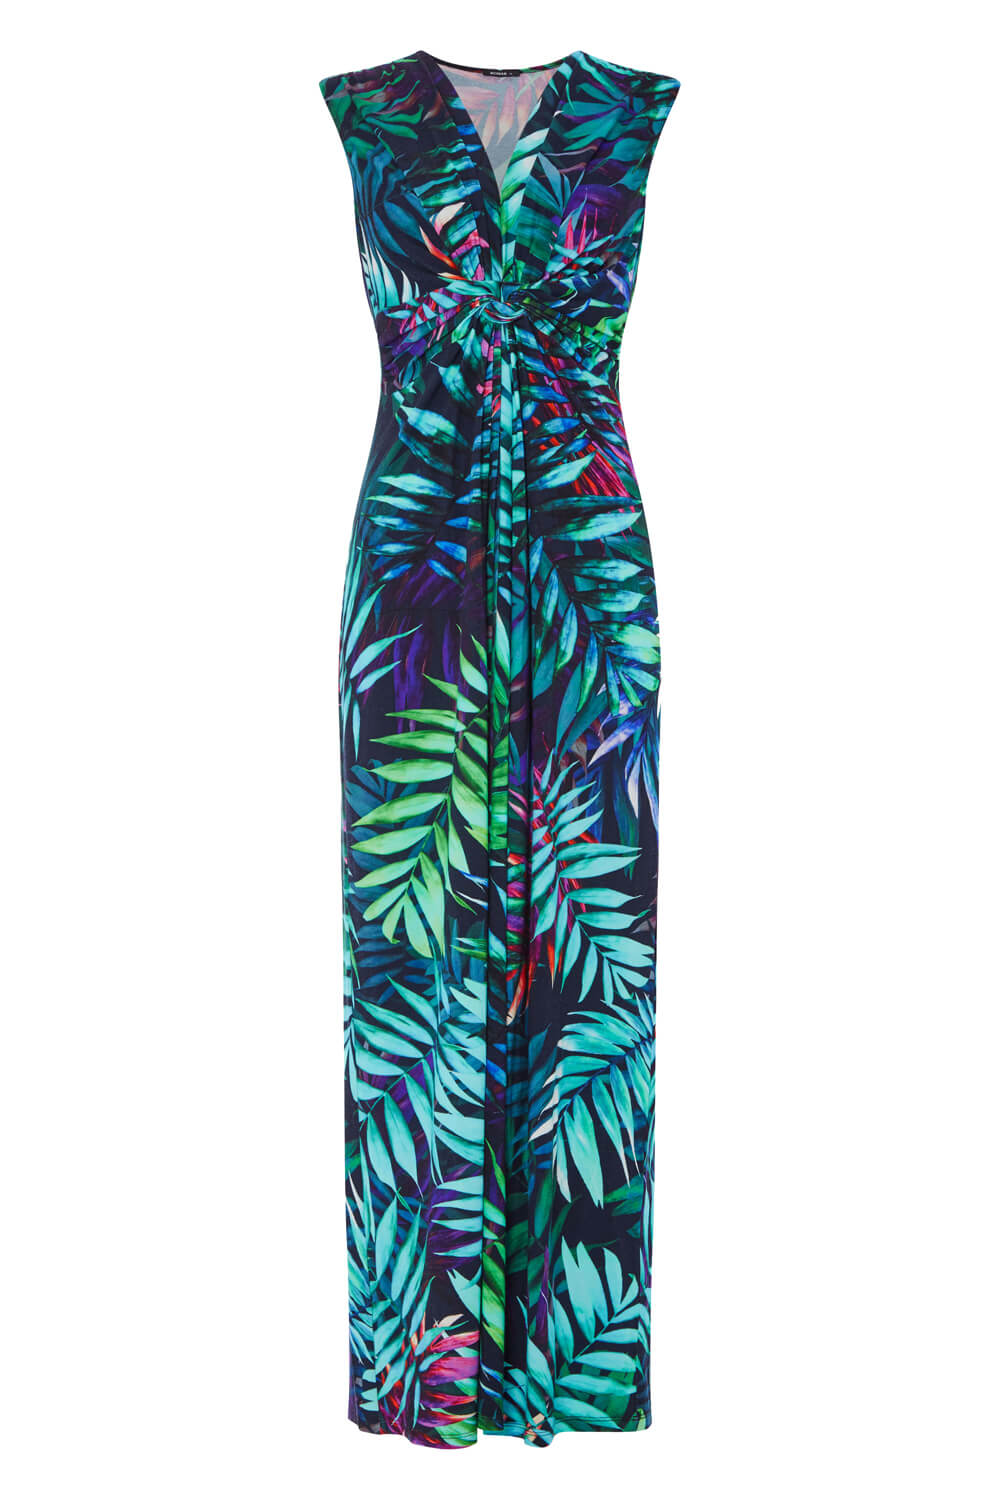 Turquoise Tropical Print Maxi Dress, Image 6 of 6